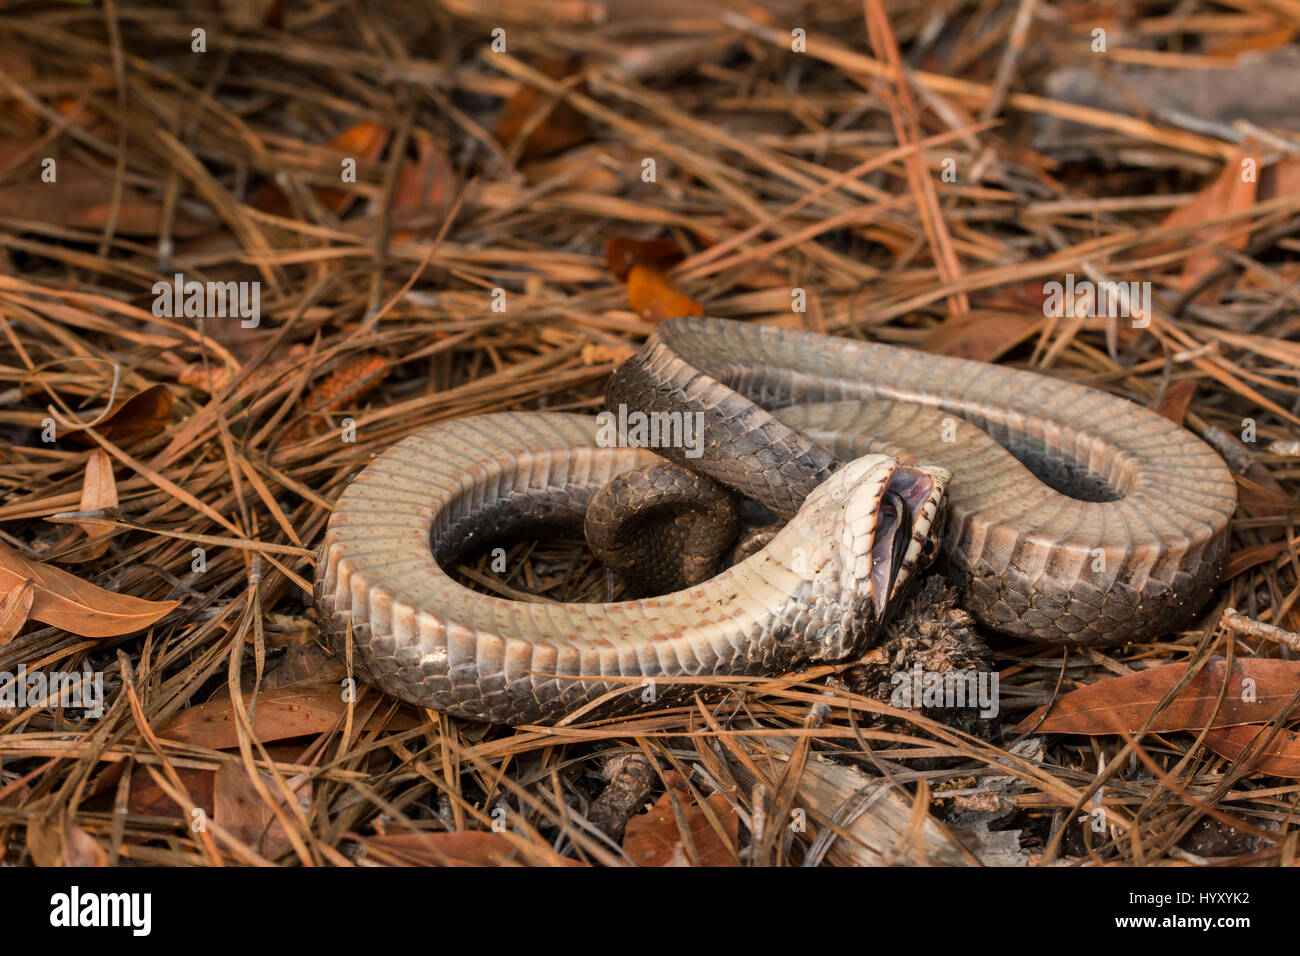 An Eastern Hognose Snake Playing Dead A Snake Playing Dead Will Stock Photo Alamy,Potty Training Crate Training A Puppy